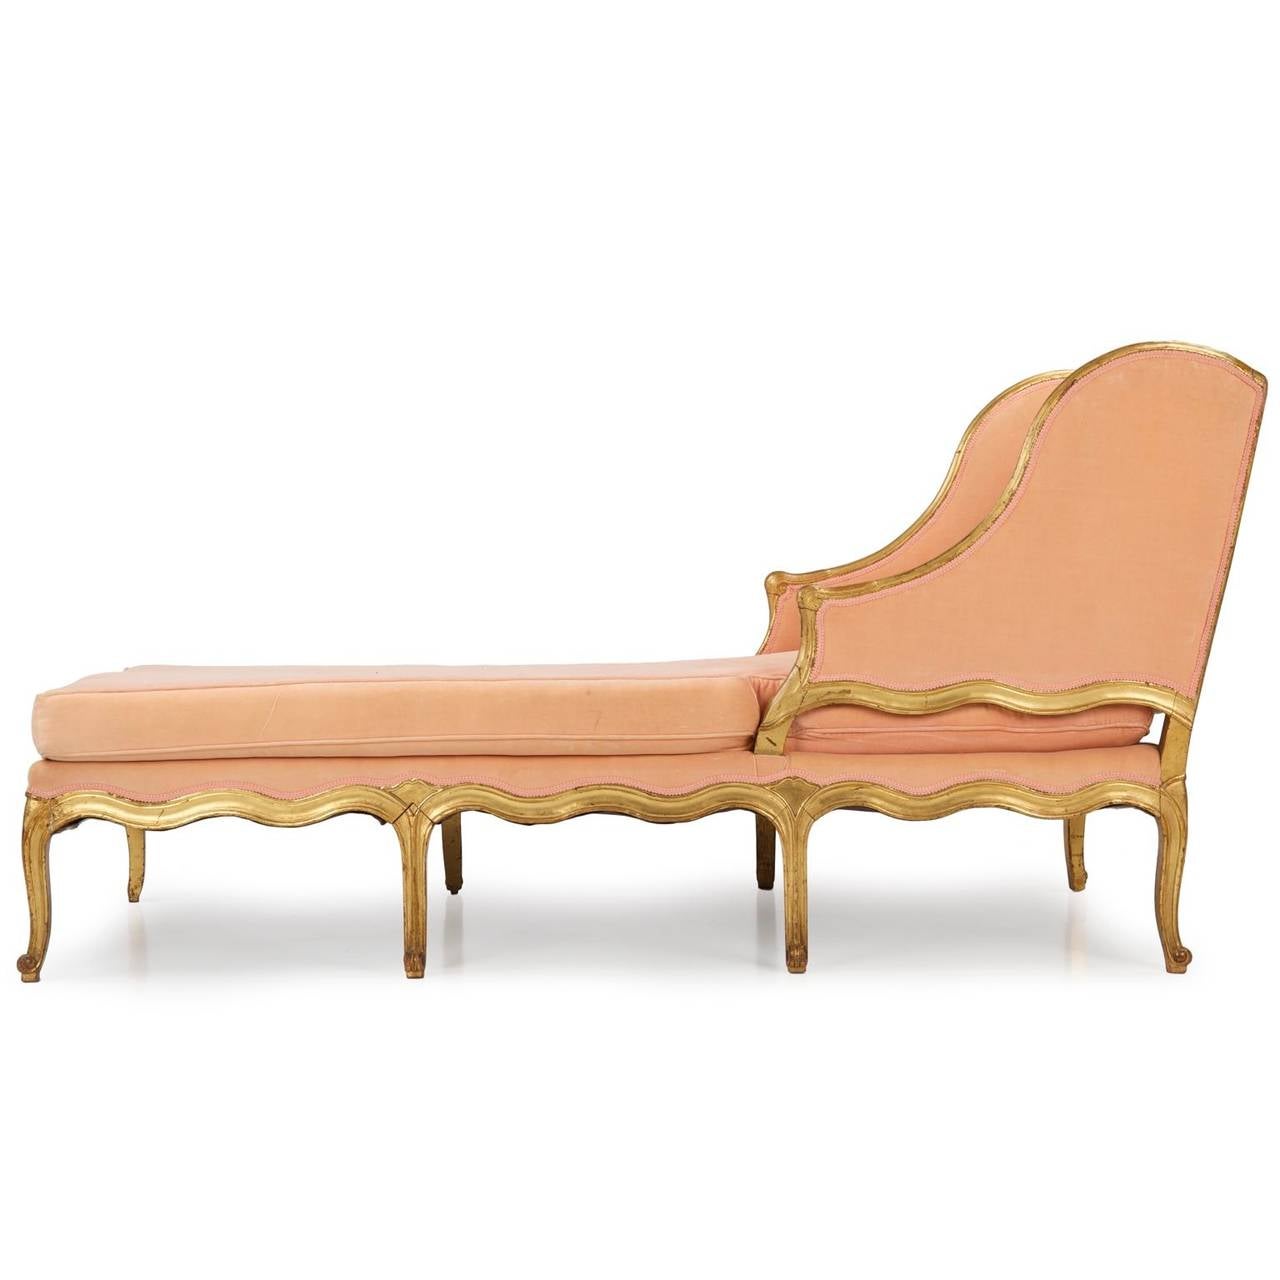 This large and unique chaise longue was probably crafted during the first quarter of the 19th century, the shapely design contrasting the angularity of the seat against an almost unending undulation in the frame. The curvy form is emphasized by the